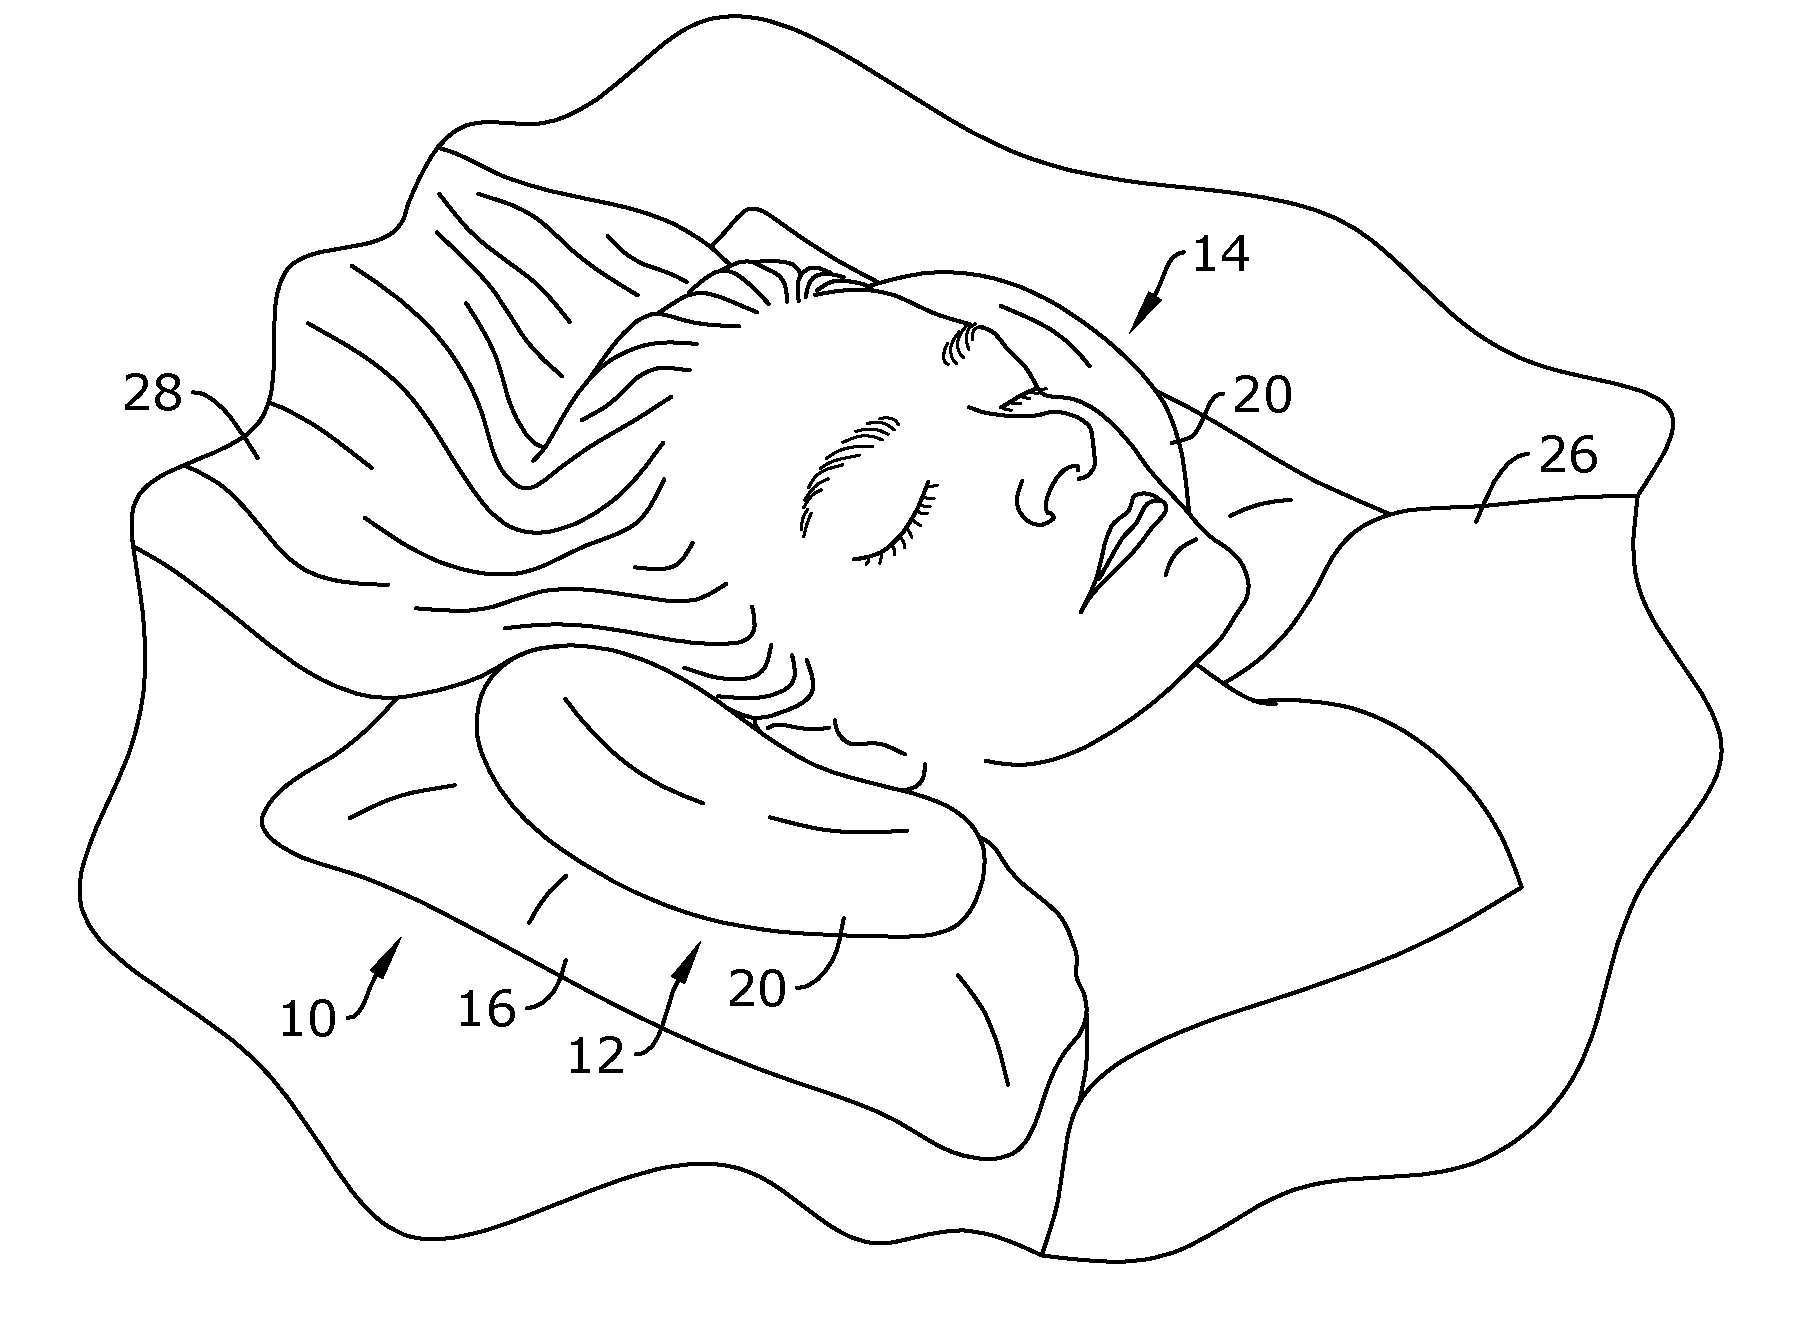 Supportive head cradle pillow to aid in back sleeping and protect facial skin